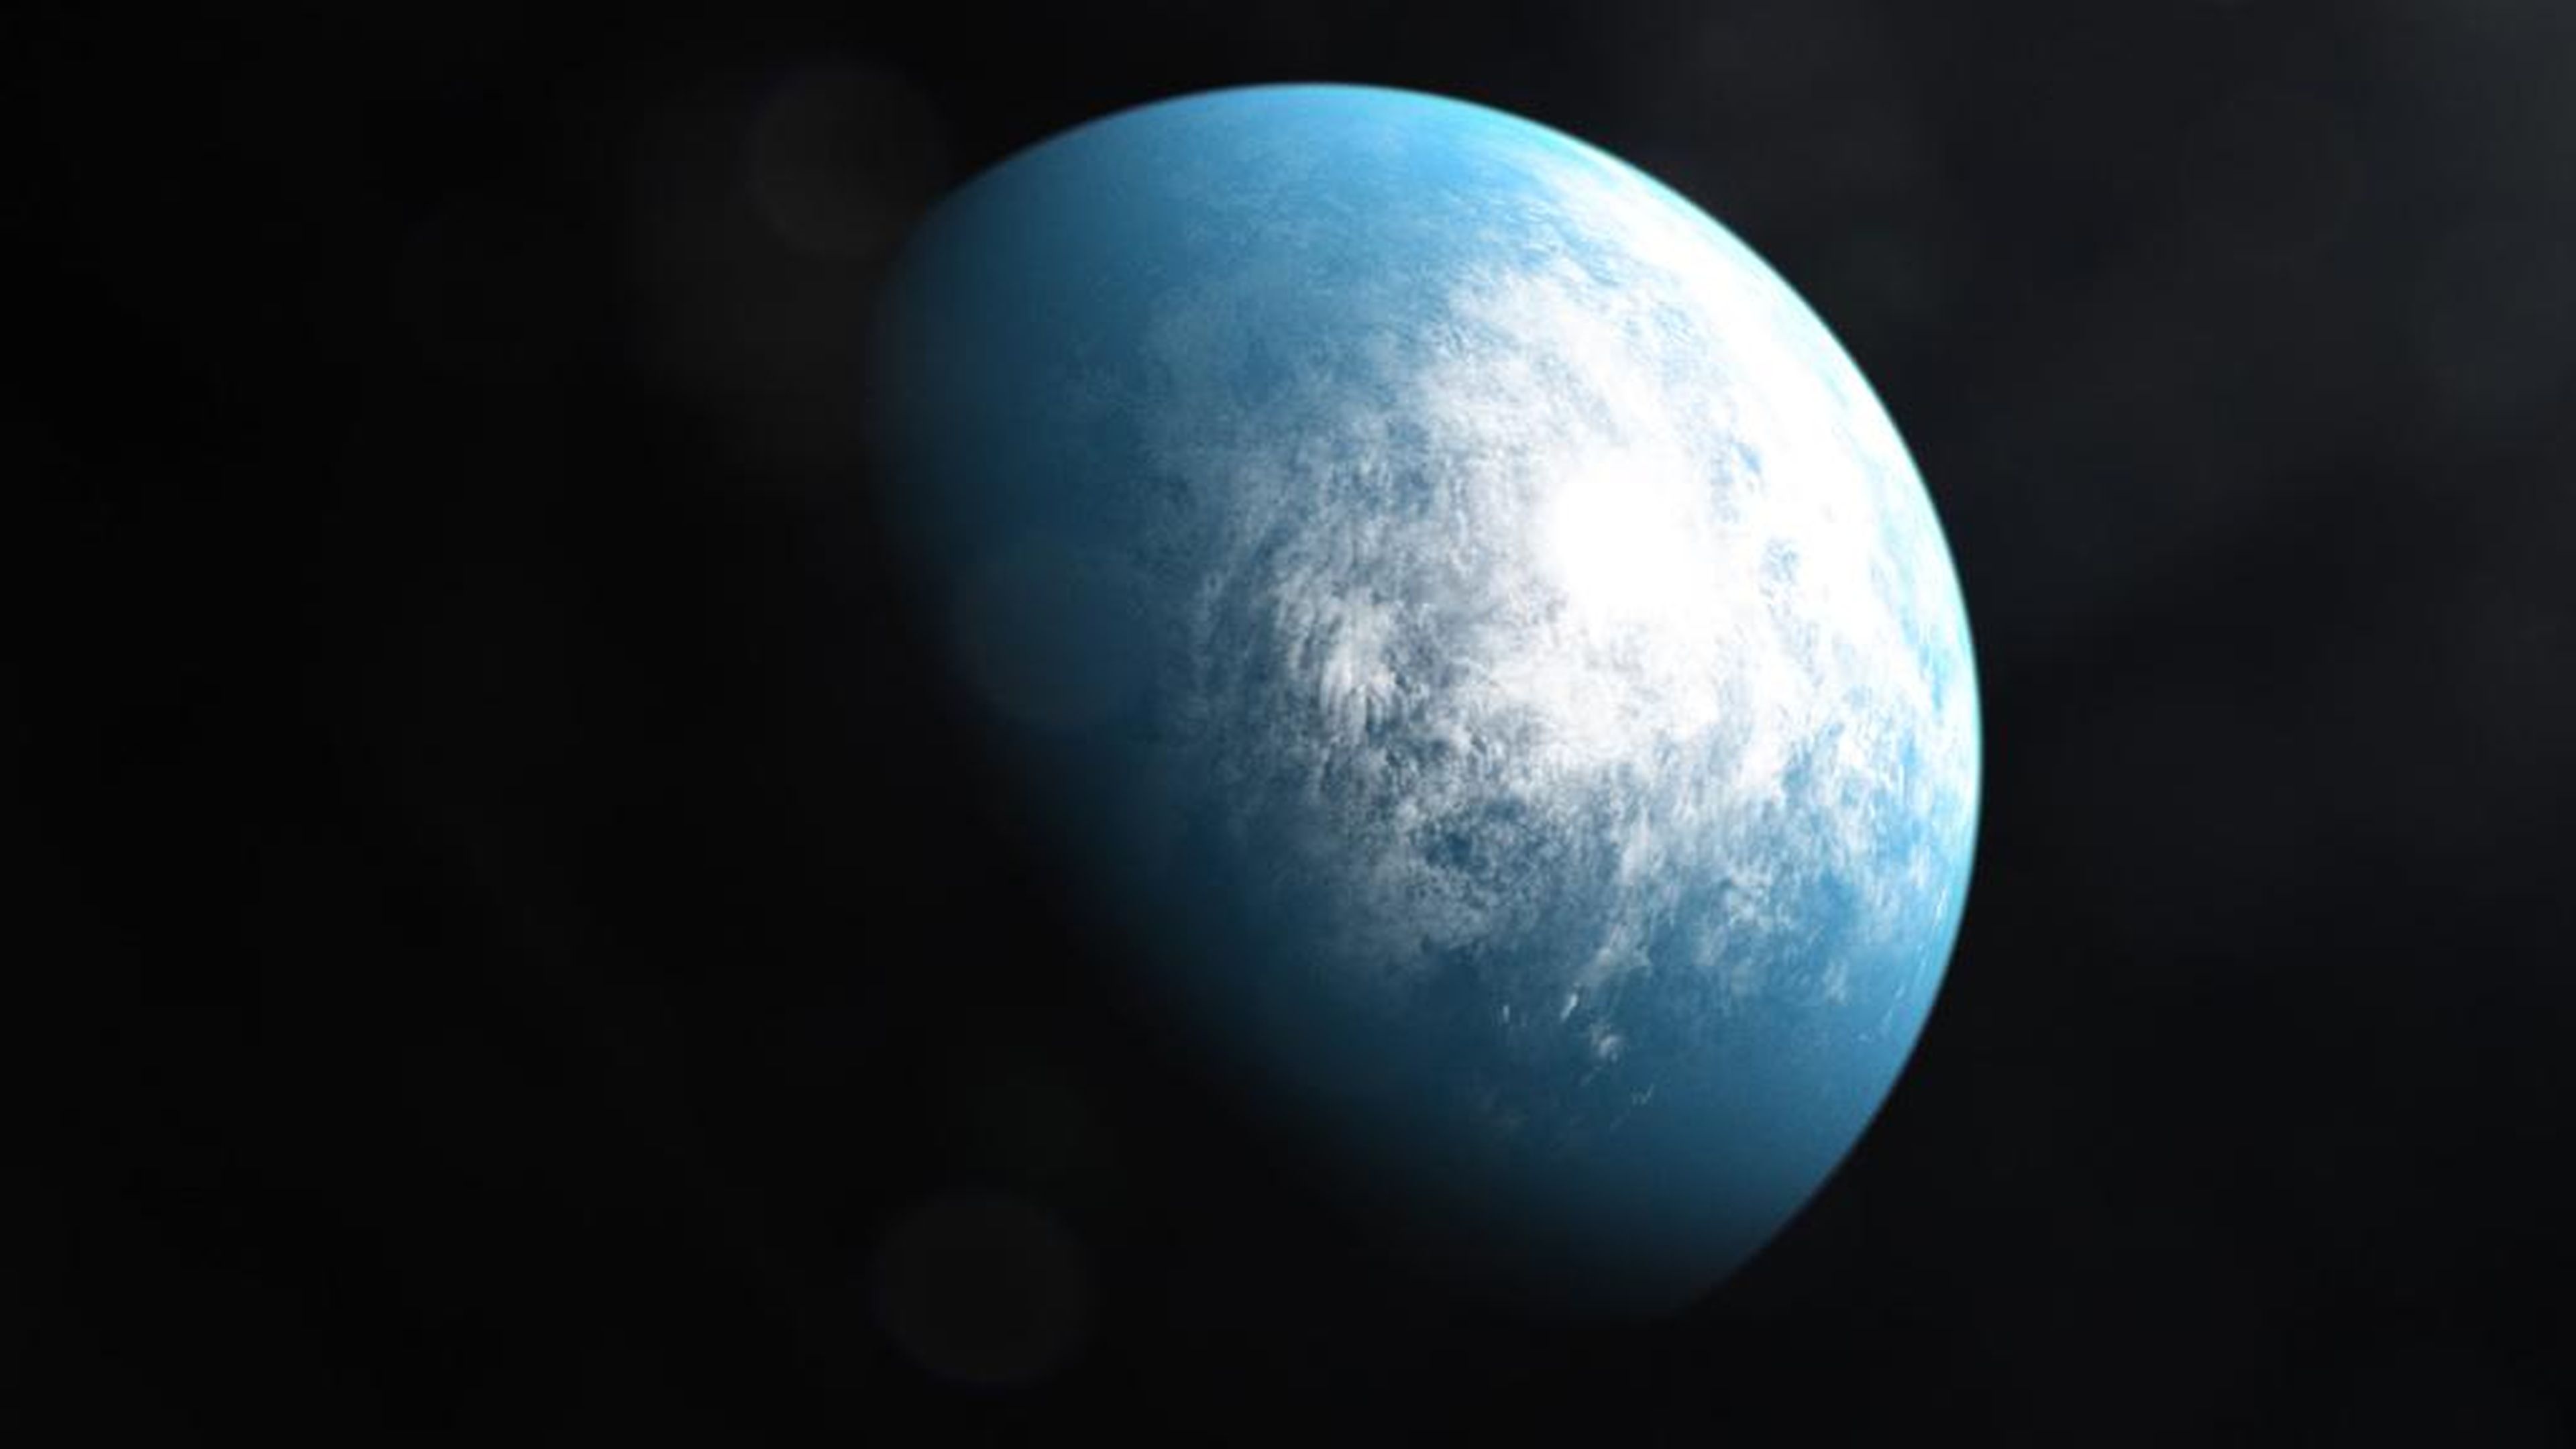 An exoplanet named TOI 700 d is the first Earth-size world that NASA's TESS space telescope has found that's in its star's habitable zone.